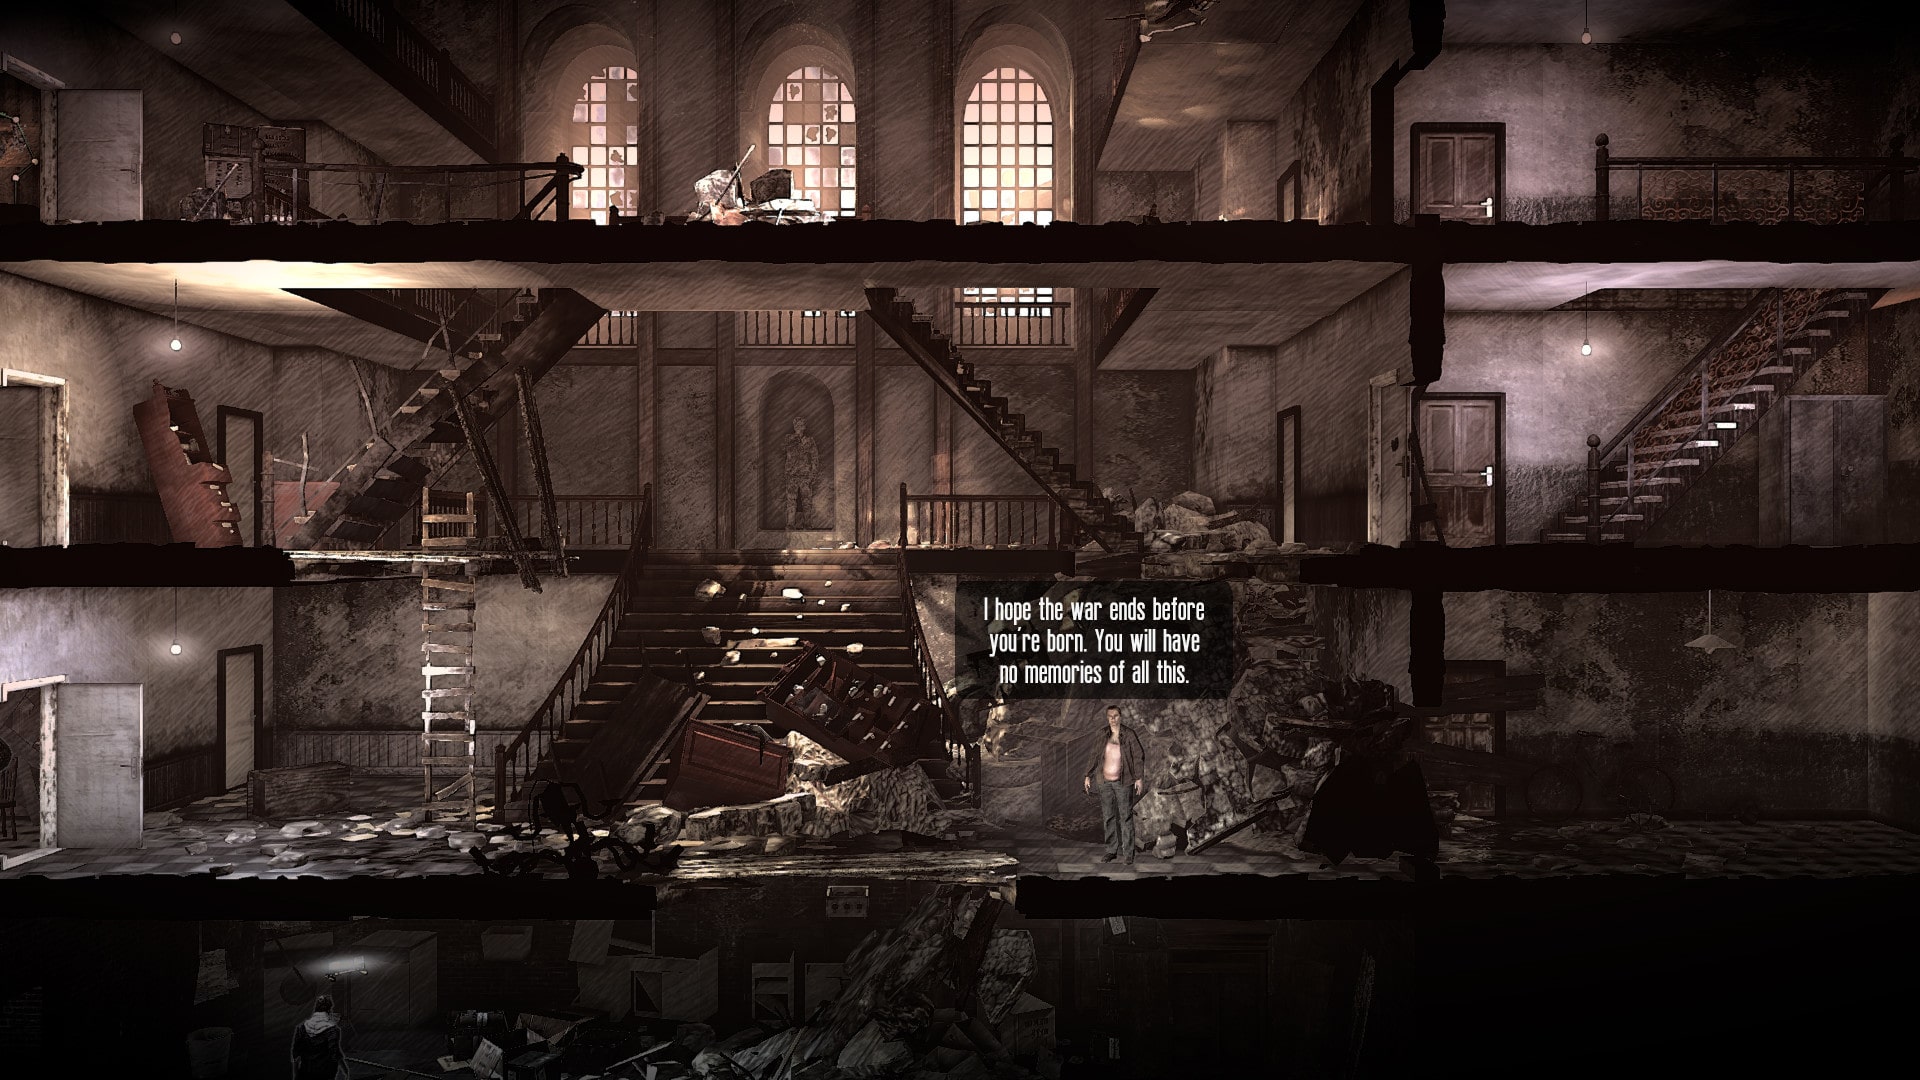 Evocative scene from This War of Mine highlighting the struggles of civilians in war